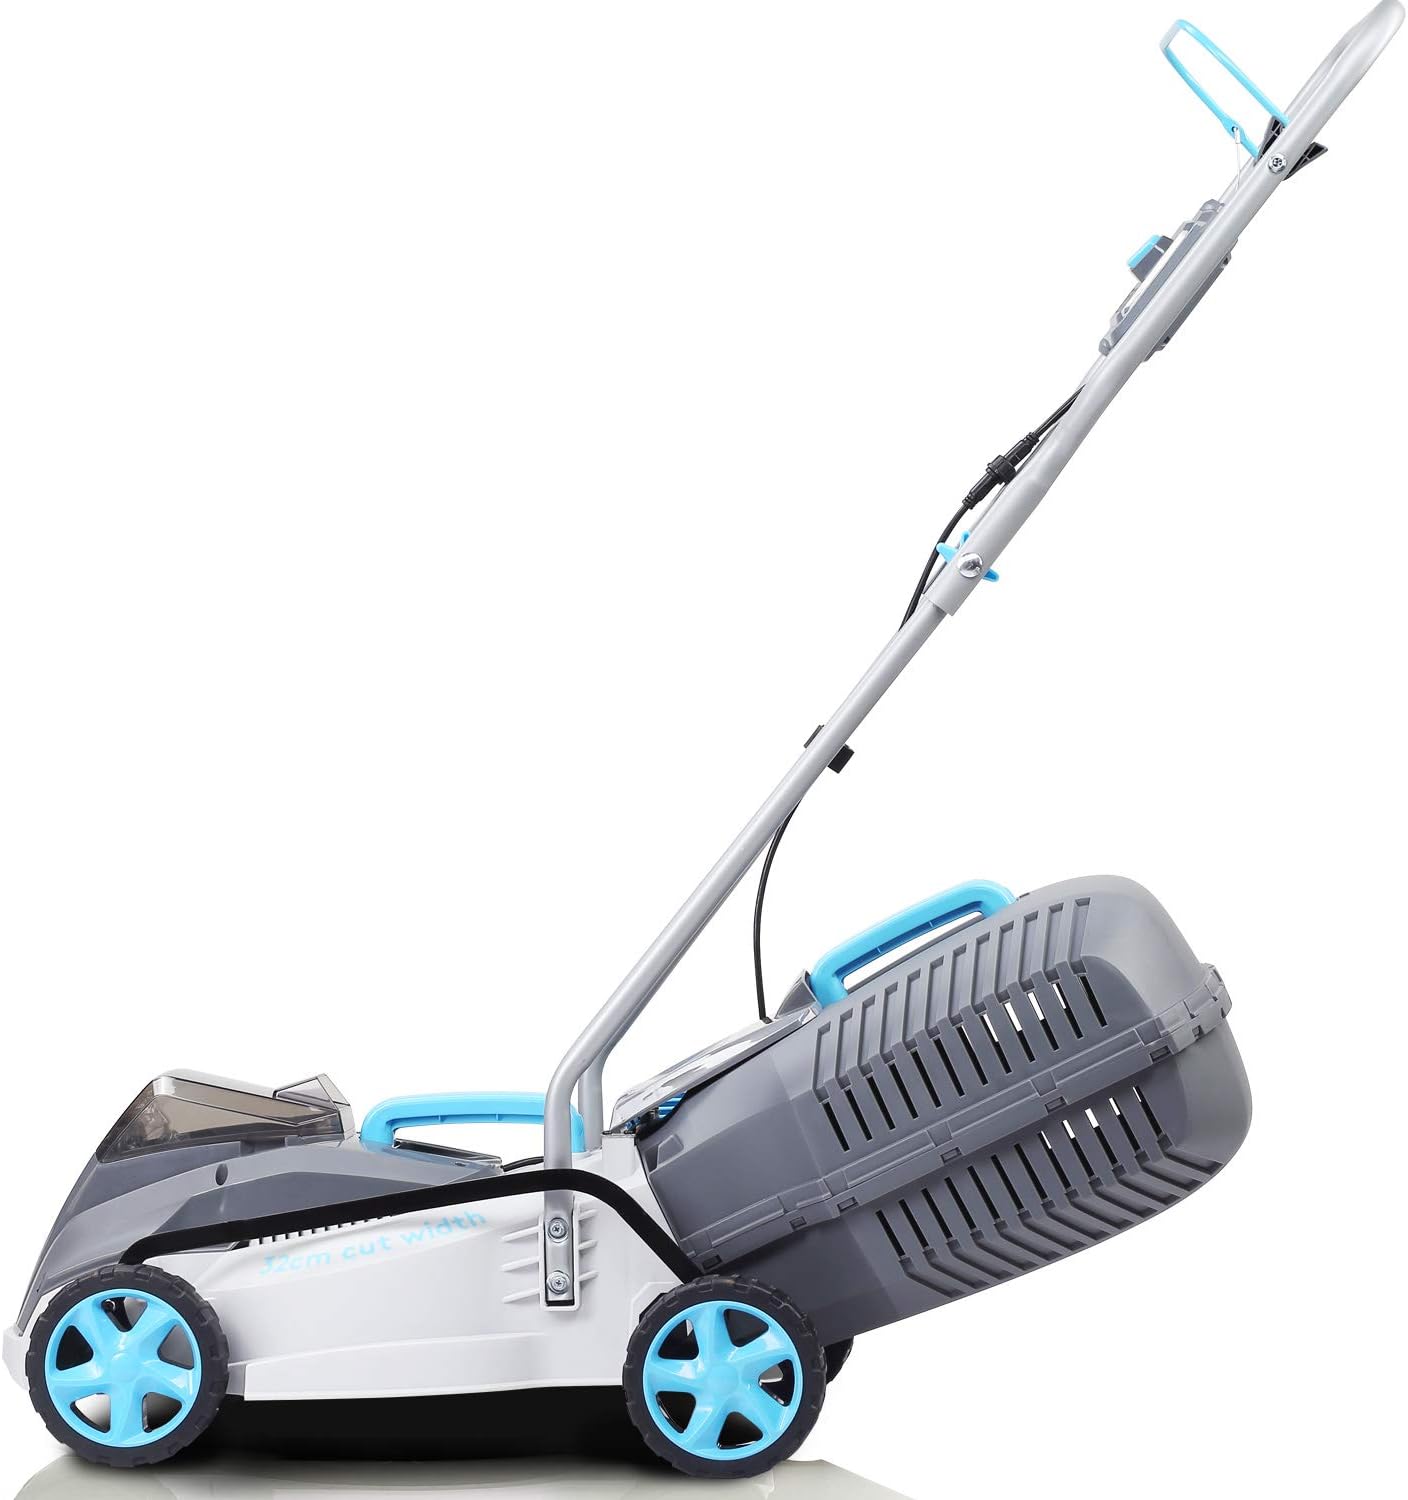 40V Brushless Cordless Lawnmower 32cm Digital Compact Electric Lawn Mower Without Battery and Charger